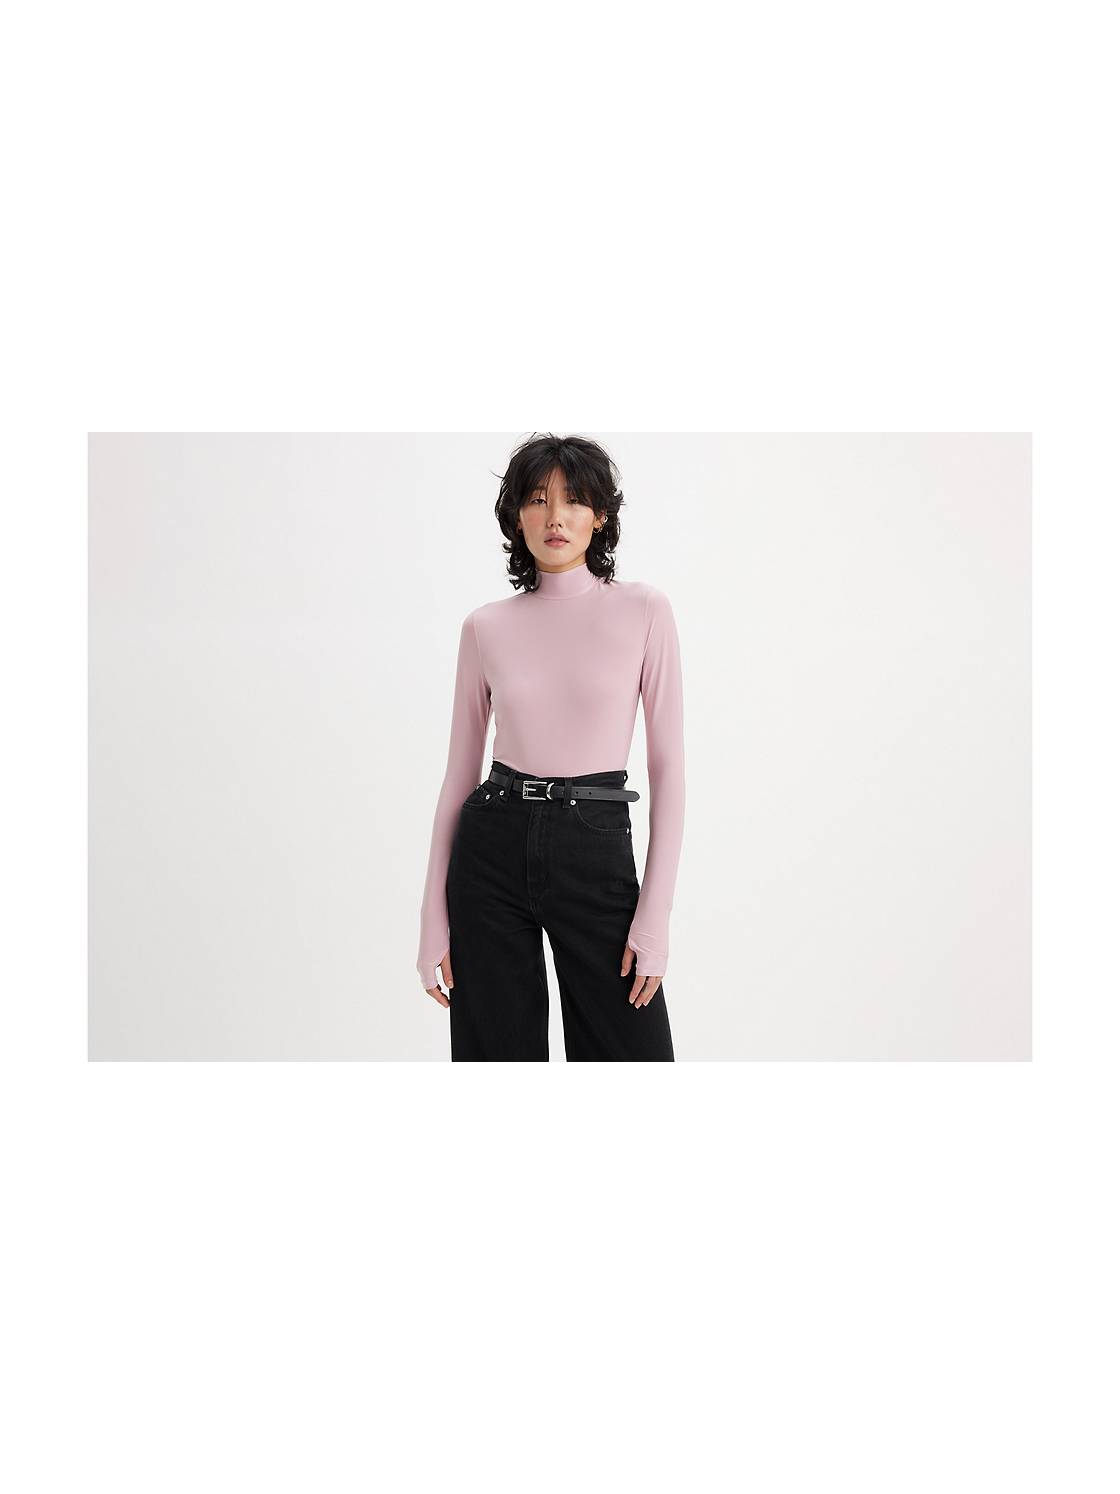 Women's Purple New Arrival Clothing & Accessories